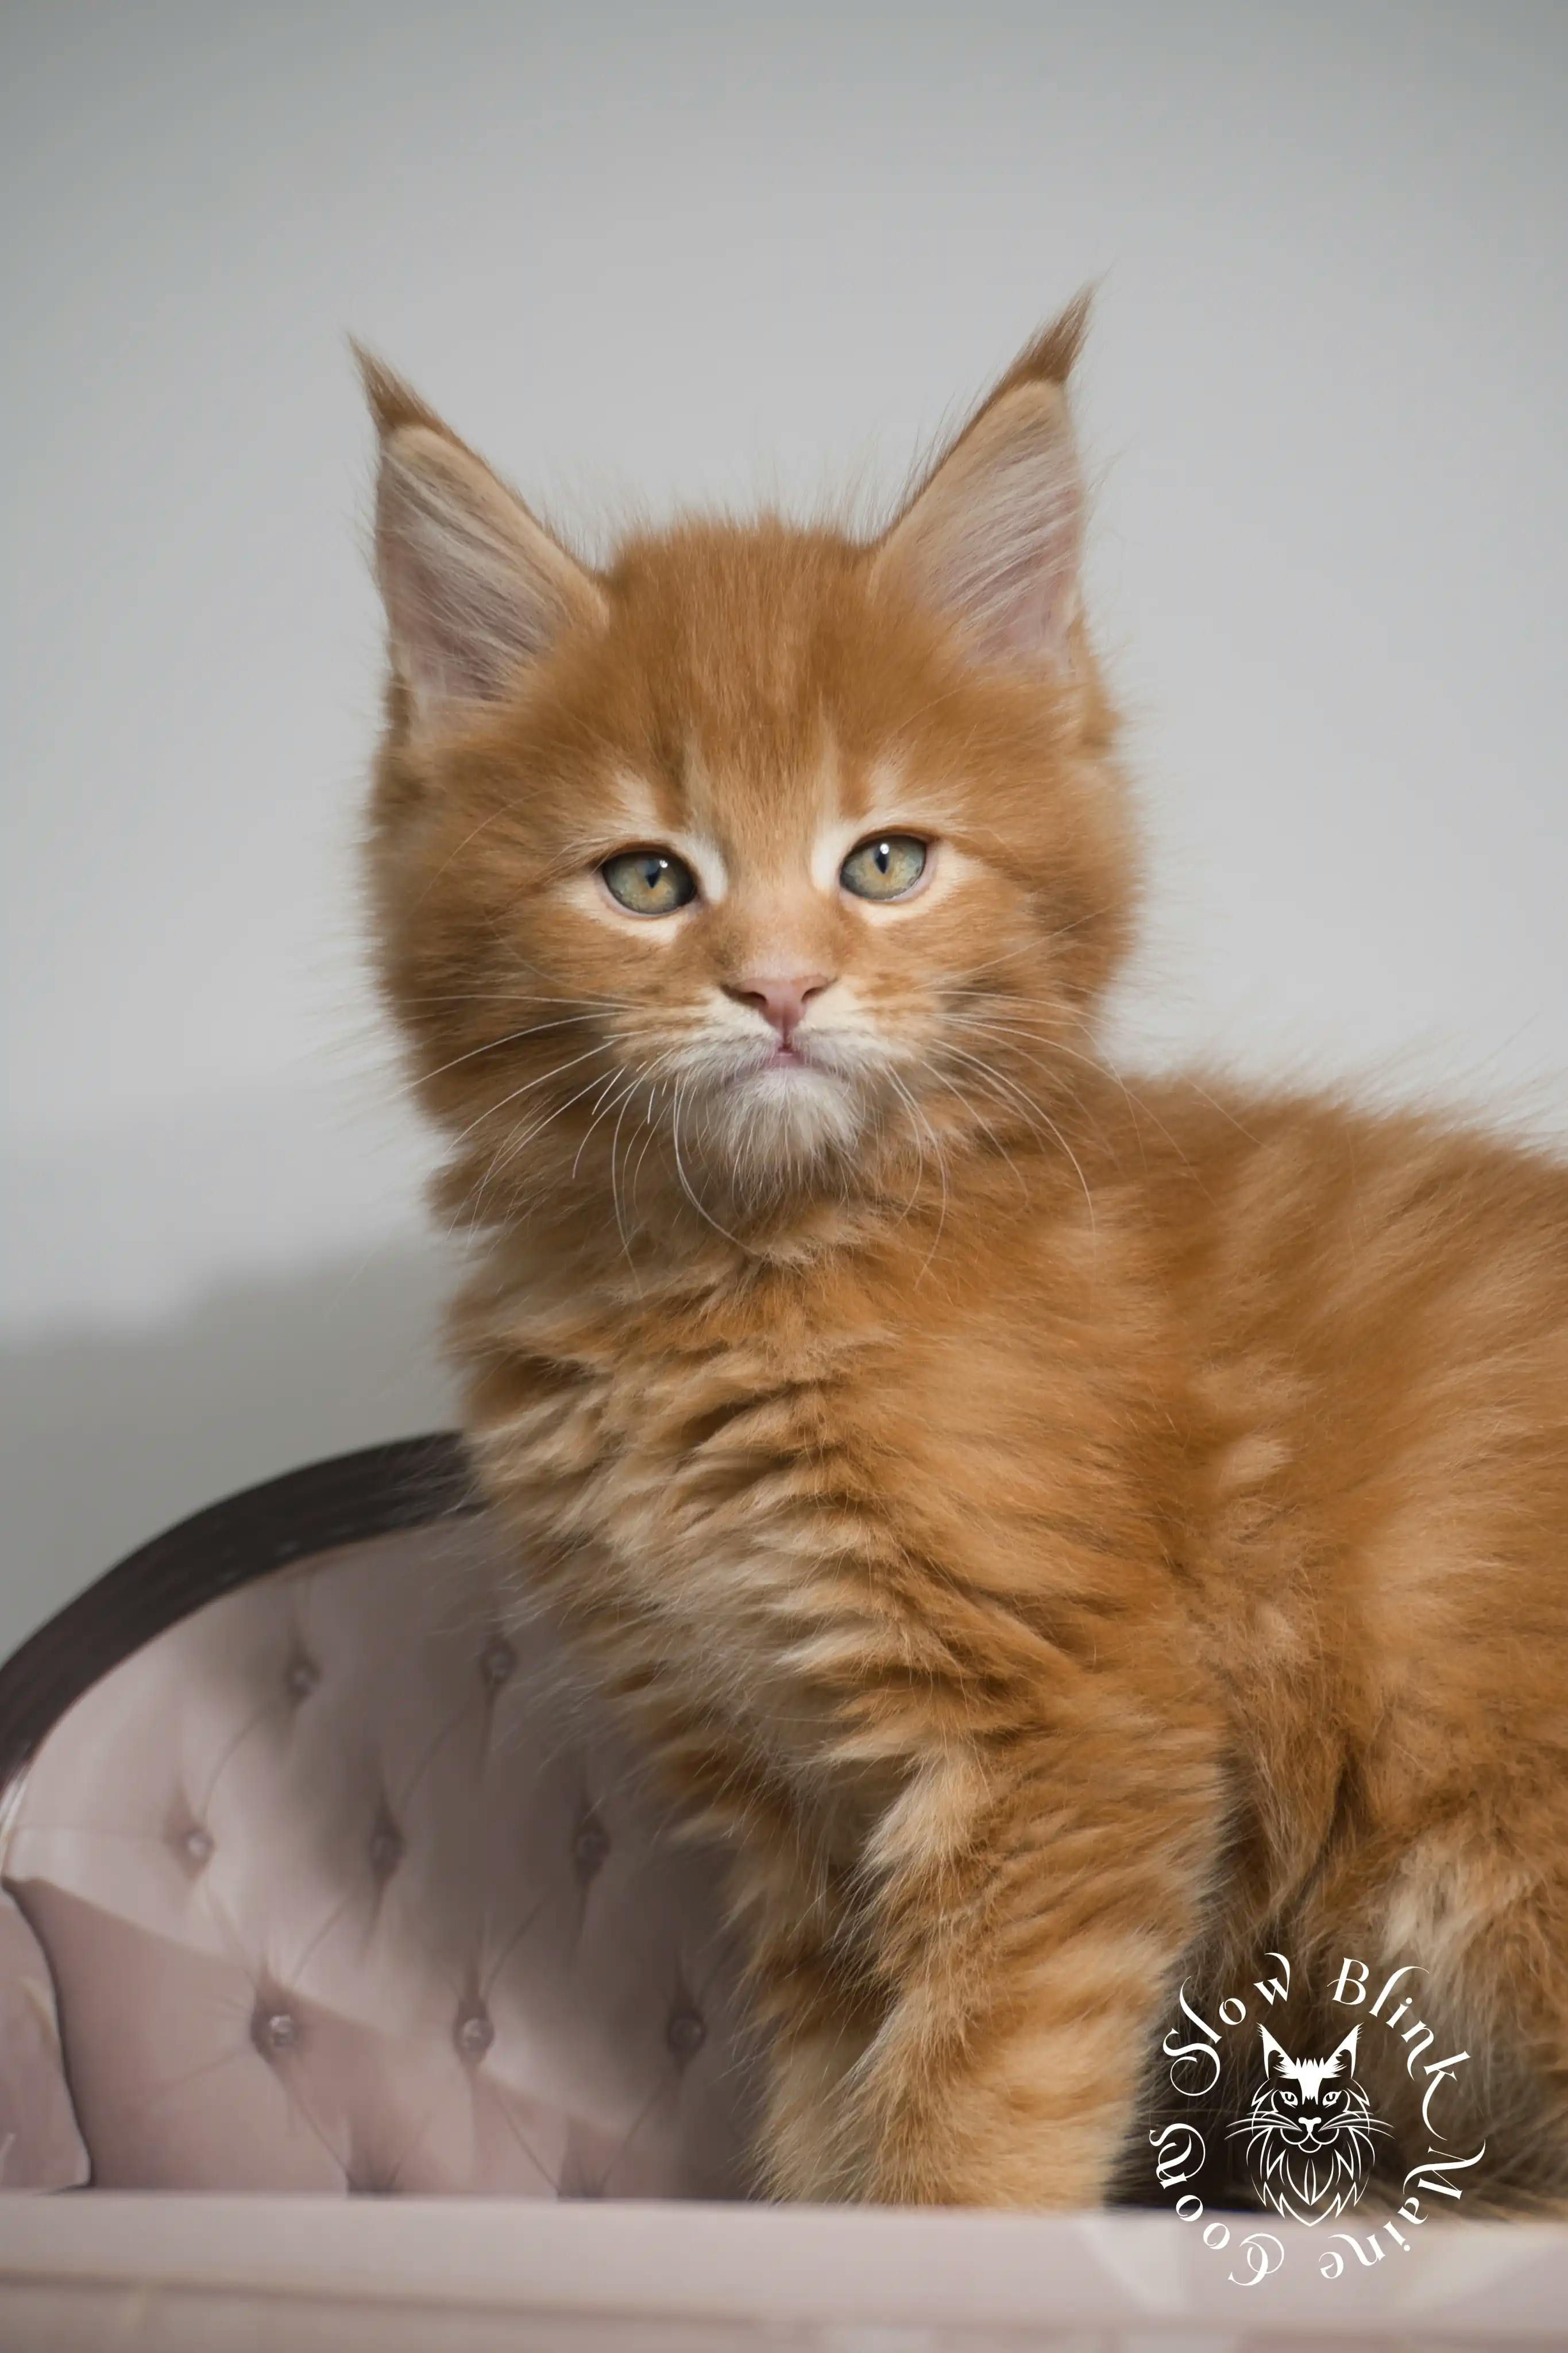 Orange (Red) Maine Coon Kittens > red orange maine coon kitten | slowblinkmainecoons | ems code d ds ds 22 7